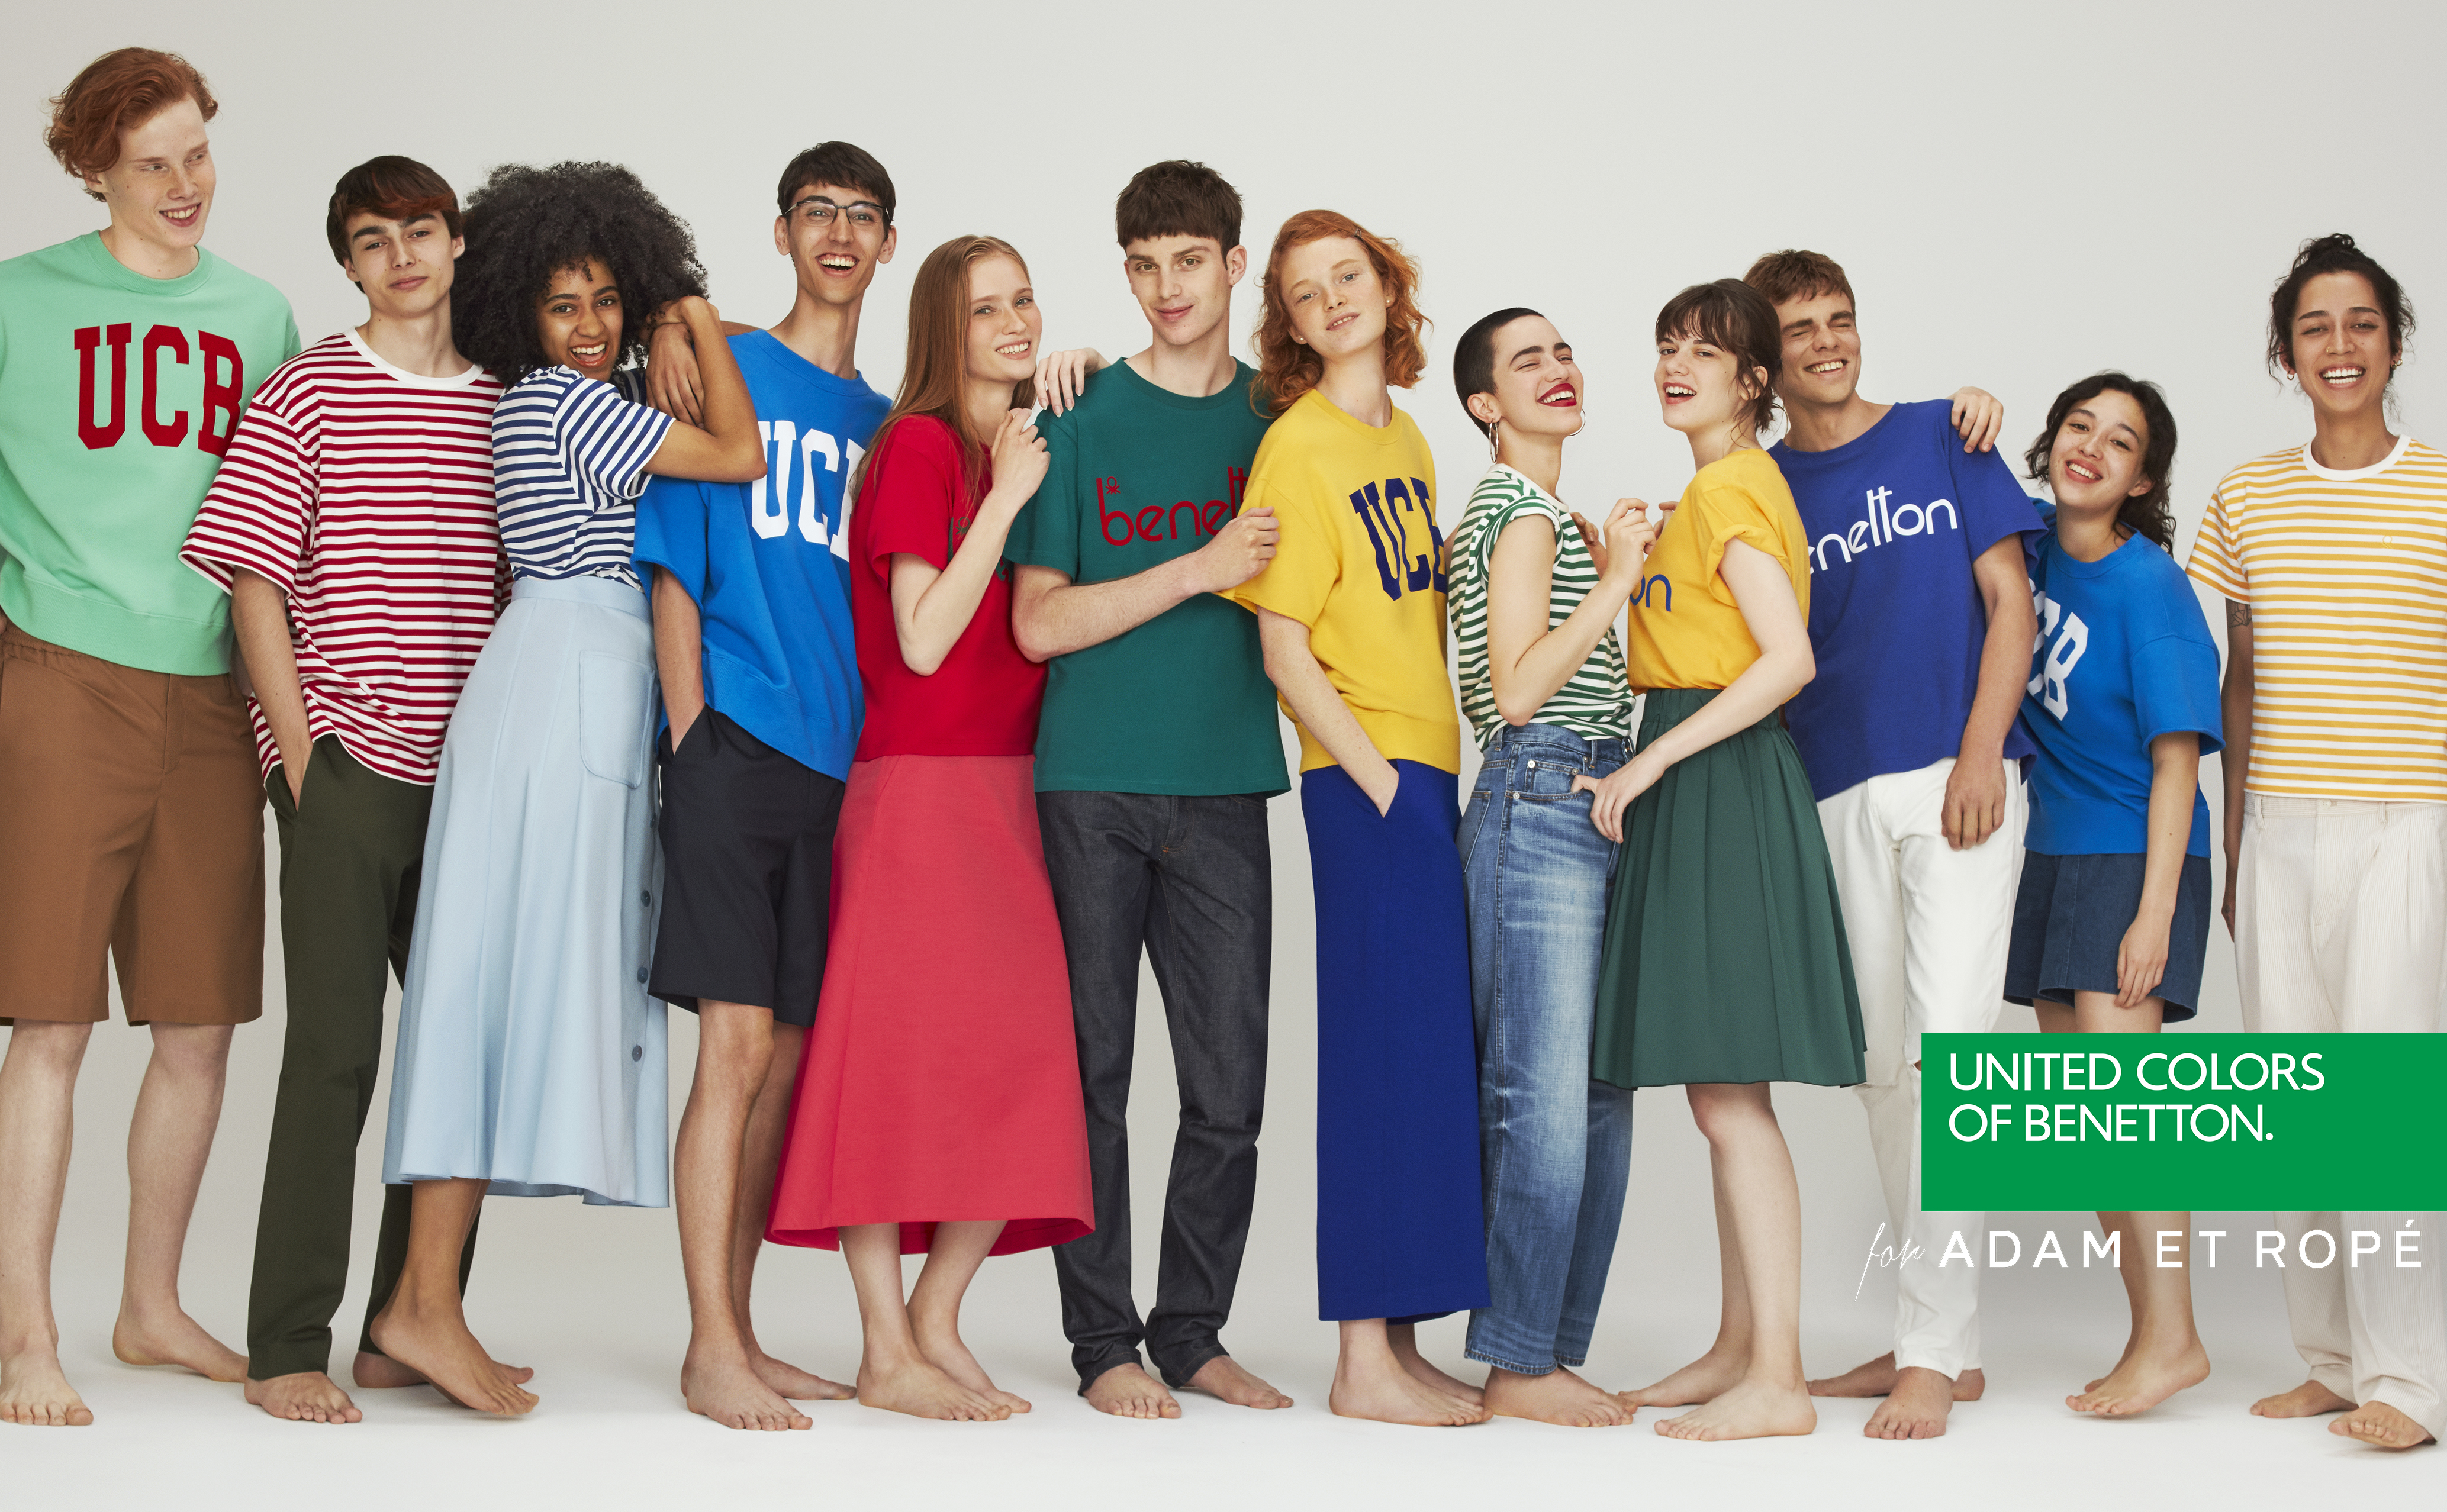 UNITED COLORS OF BENETTON275